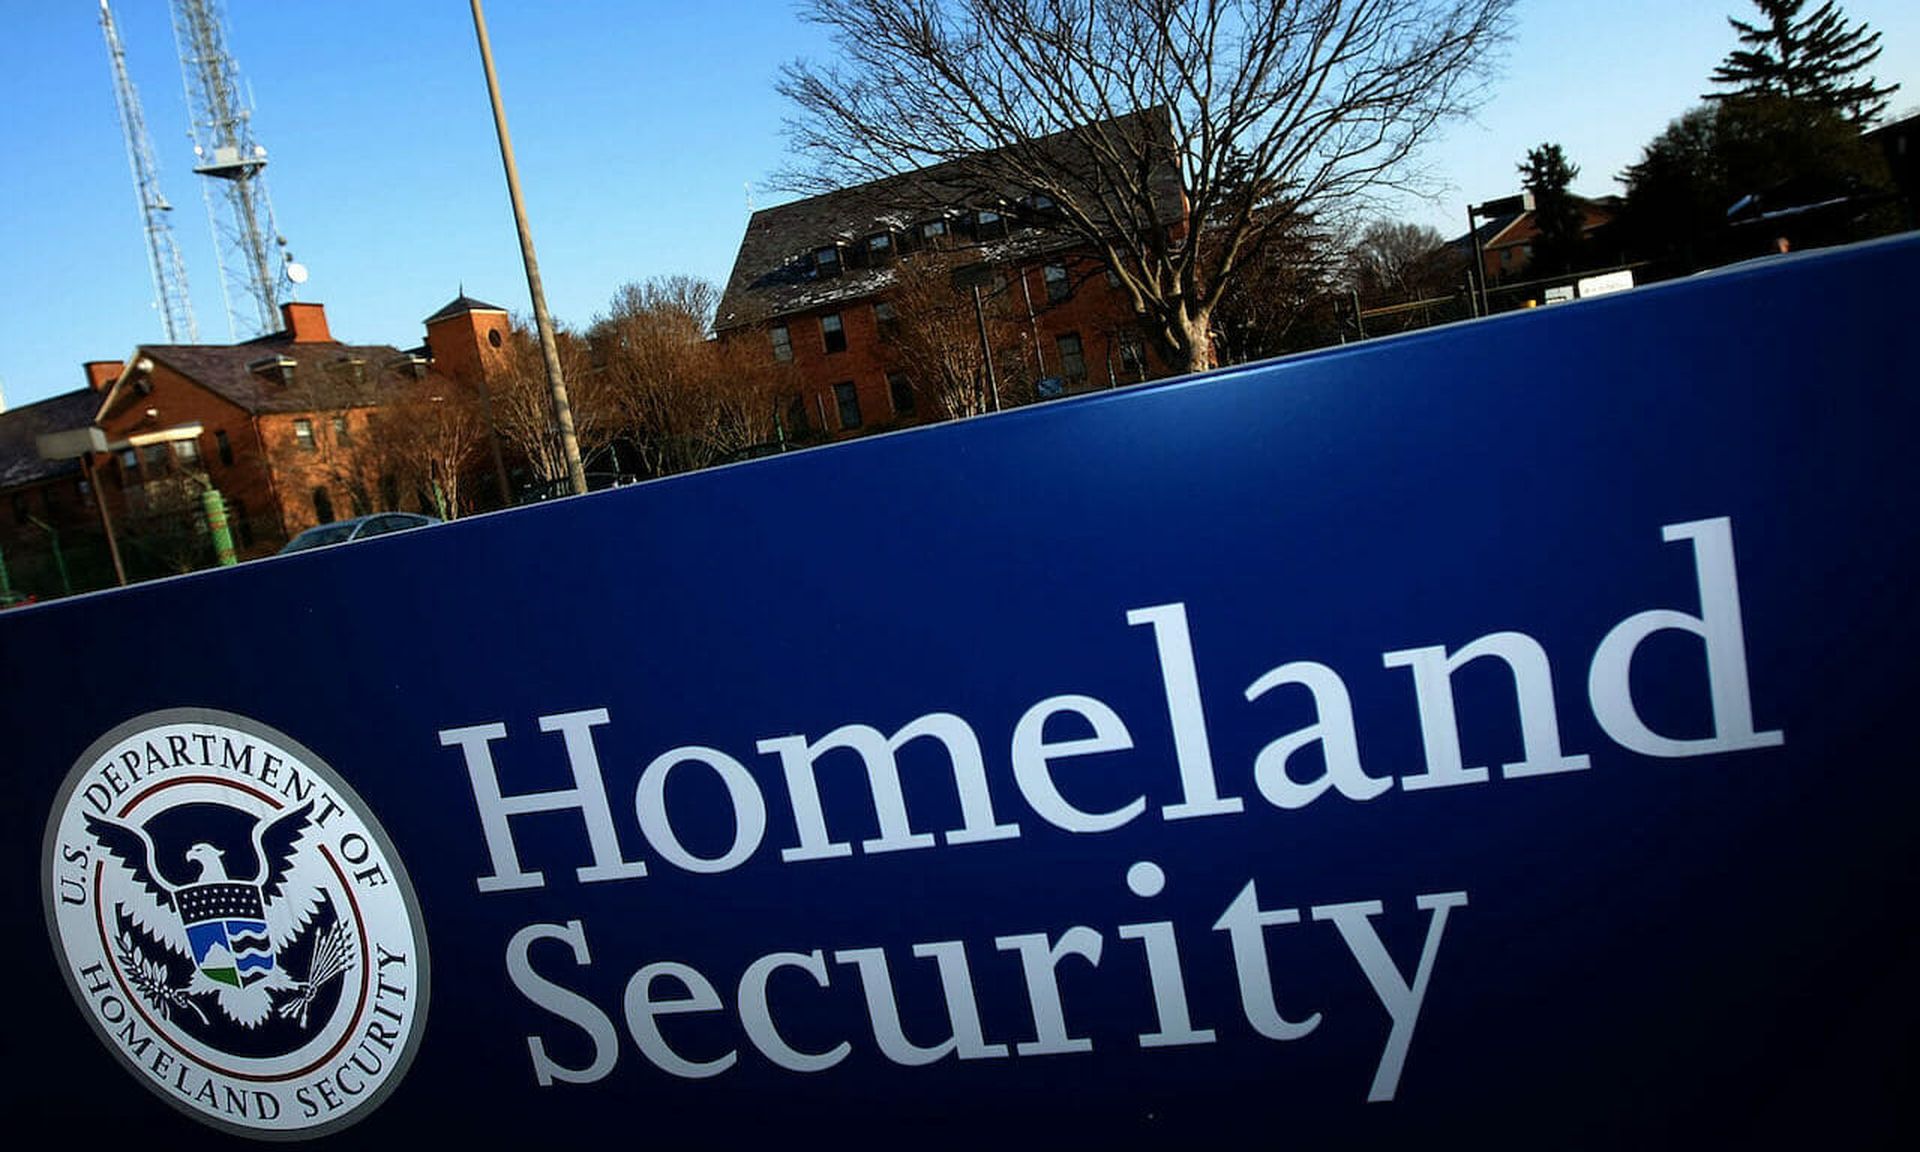 The Department of Homeland Security signage in Washington D.C. (Photo by Win McNamee/Getty Images)